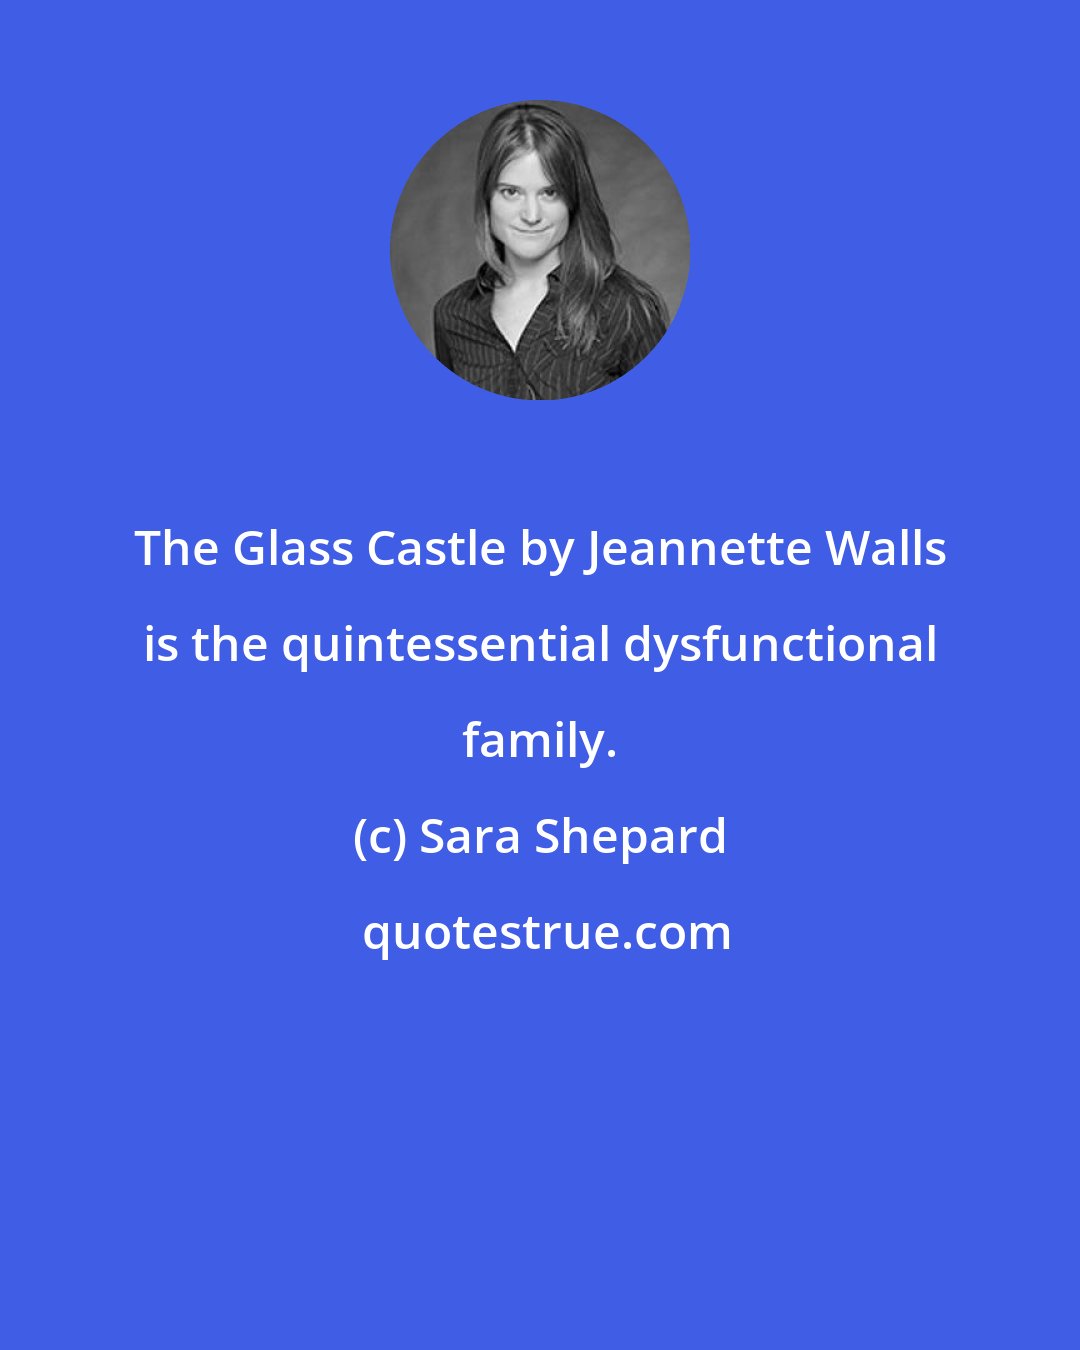 Sara Shepard: The Glass Castle by Jeannette Walls is the quintessential dysfunctional family.